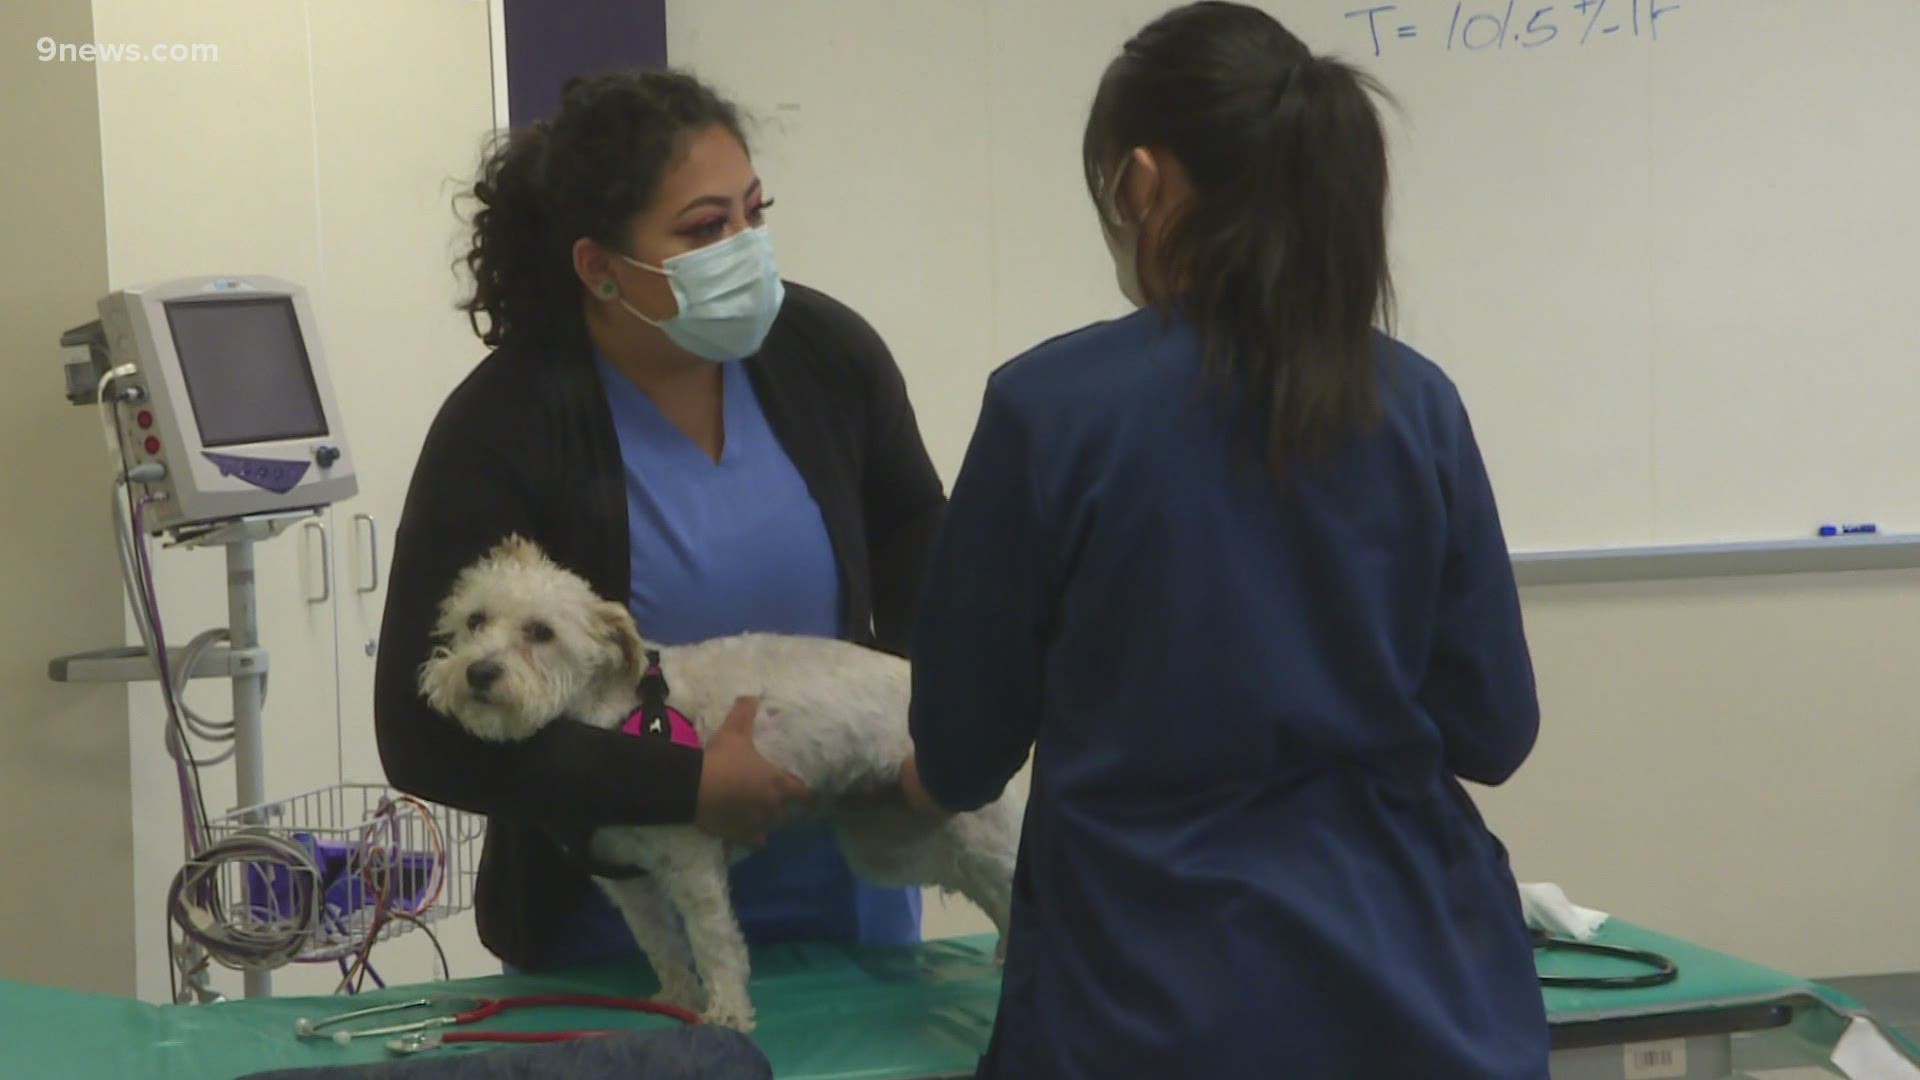 Students will work in local veterinary clinics more than 2,000 hours in addition to taking classes.